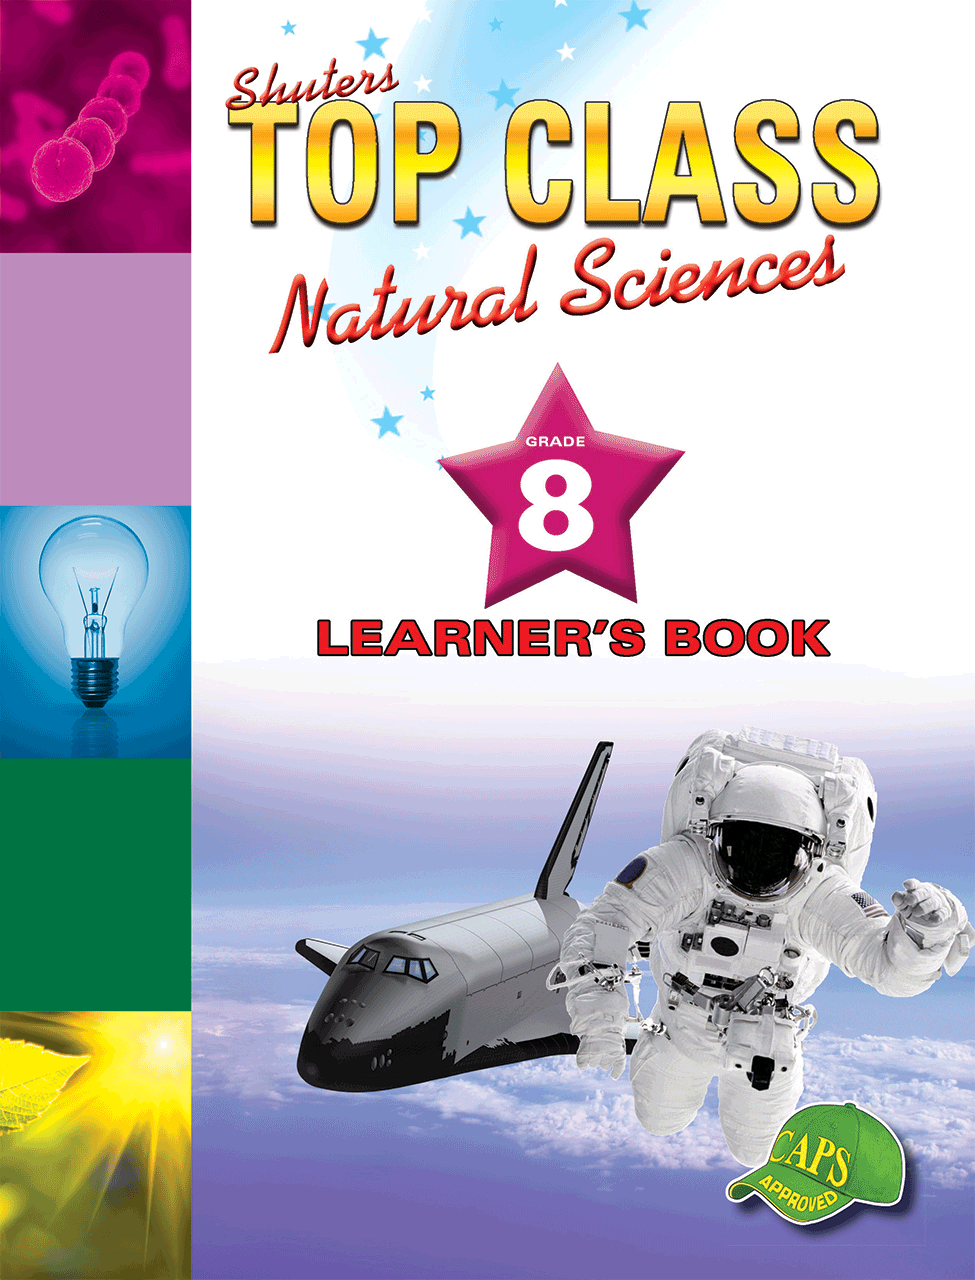 science education articles pdf